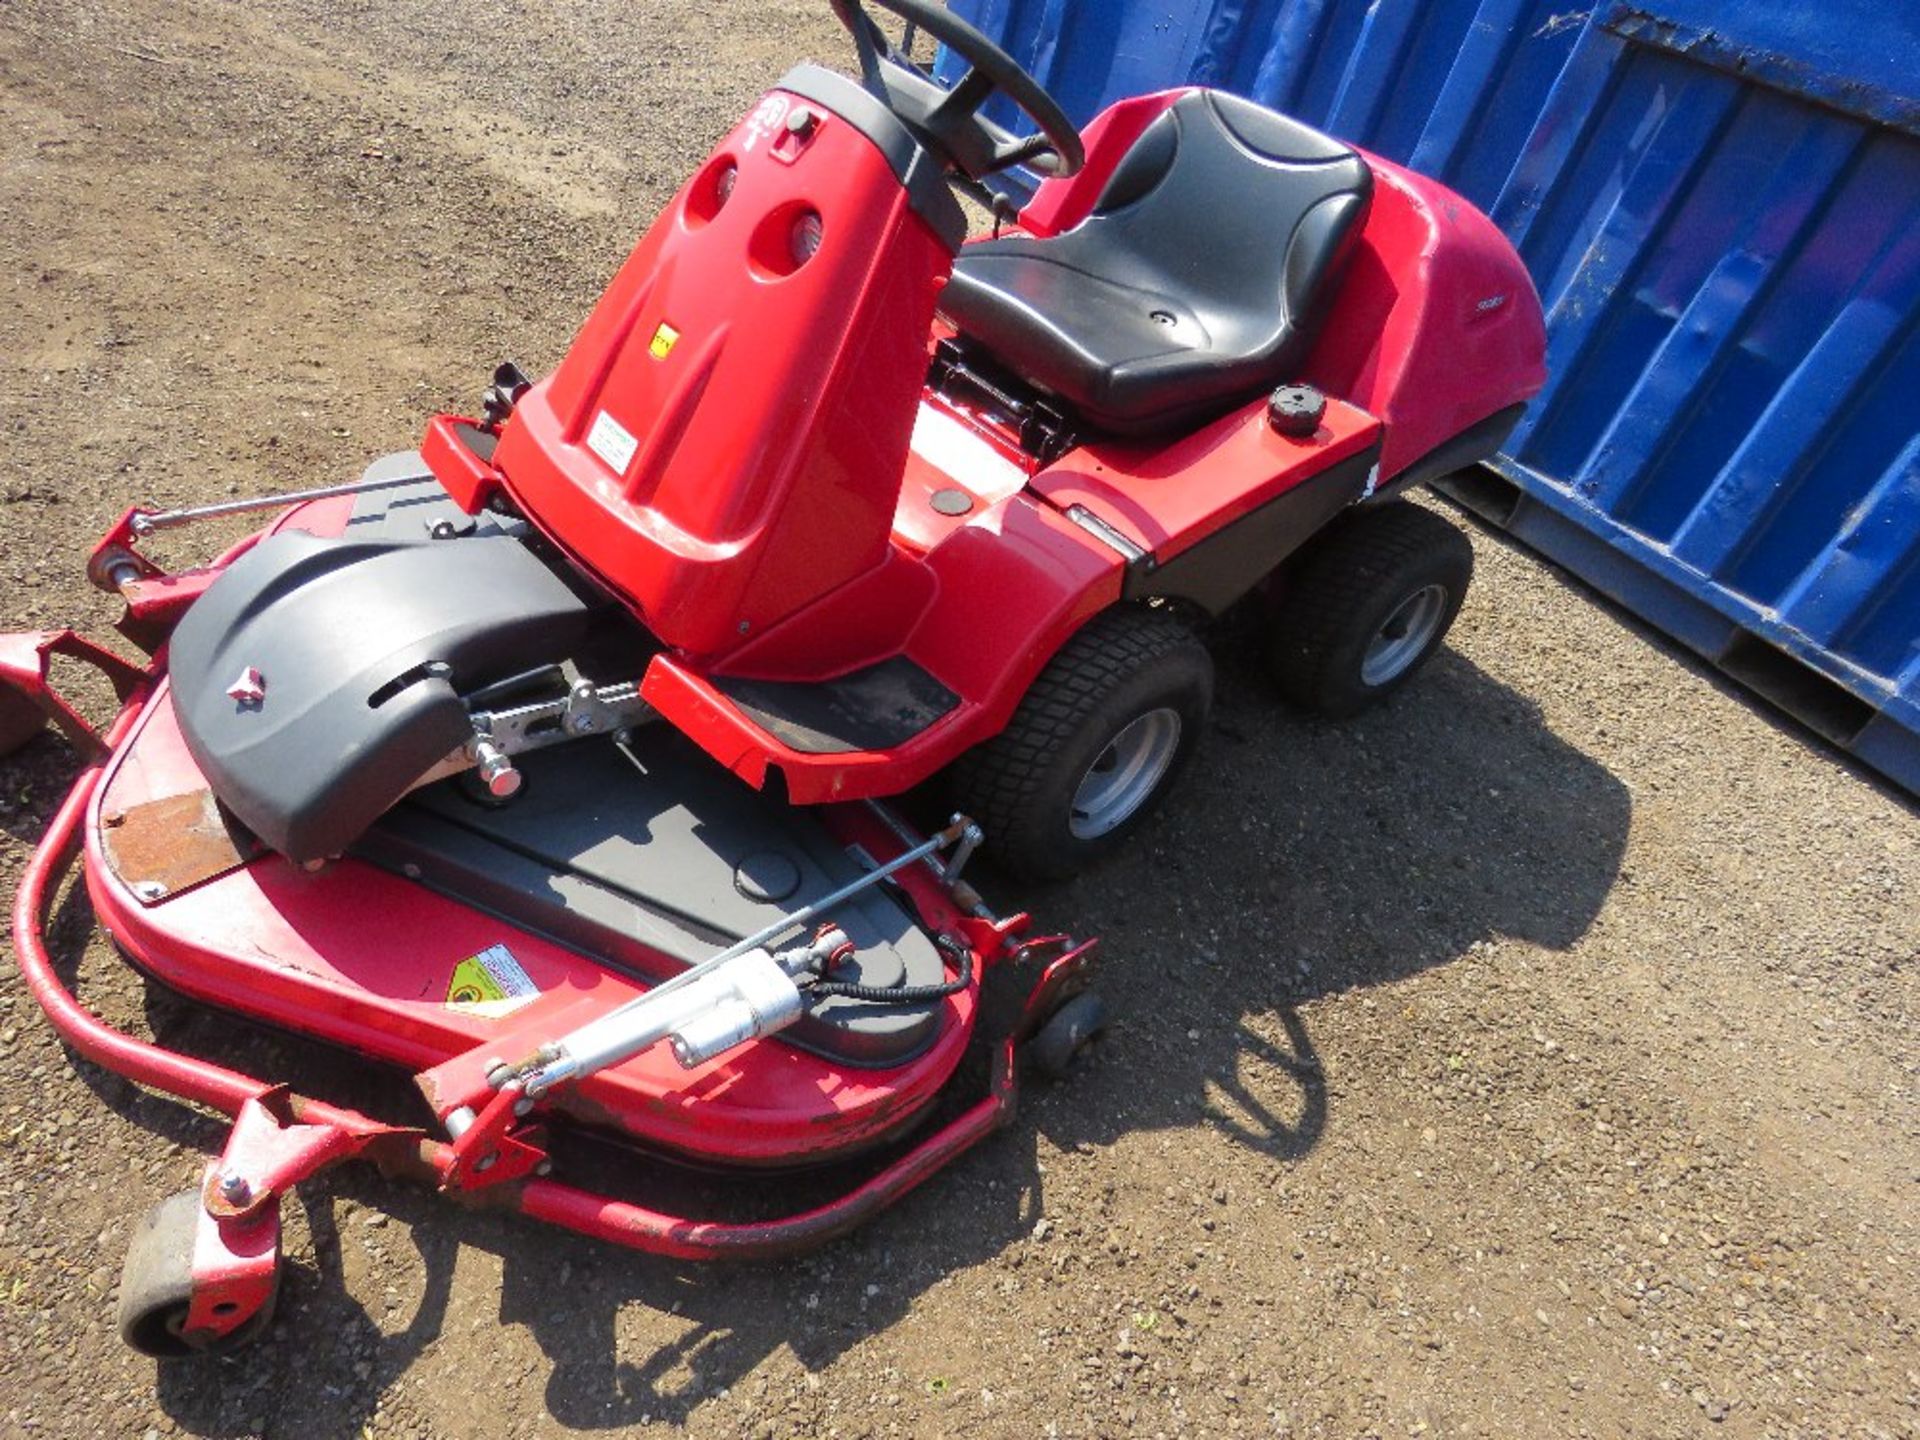 COUNTAX 4WD RIDE ON MOWER WITH OUTFRONT DECK, 394 REC HOURS, 25HP ENGINE. FINE ELECTRIC ADJUSTMENT O